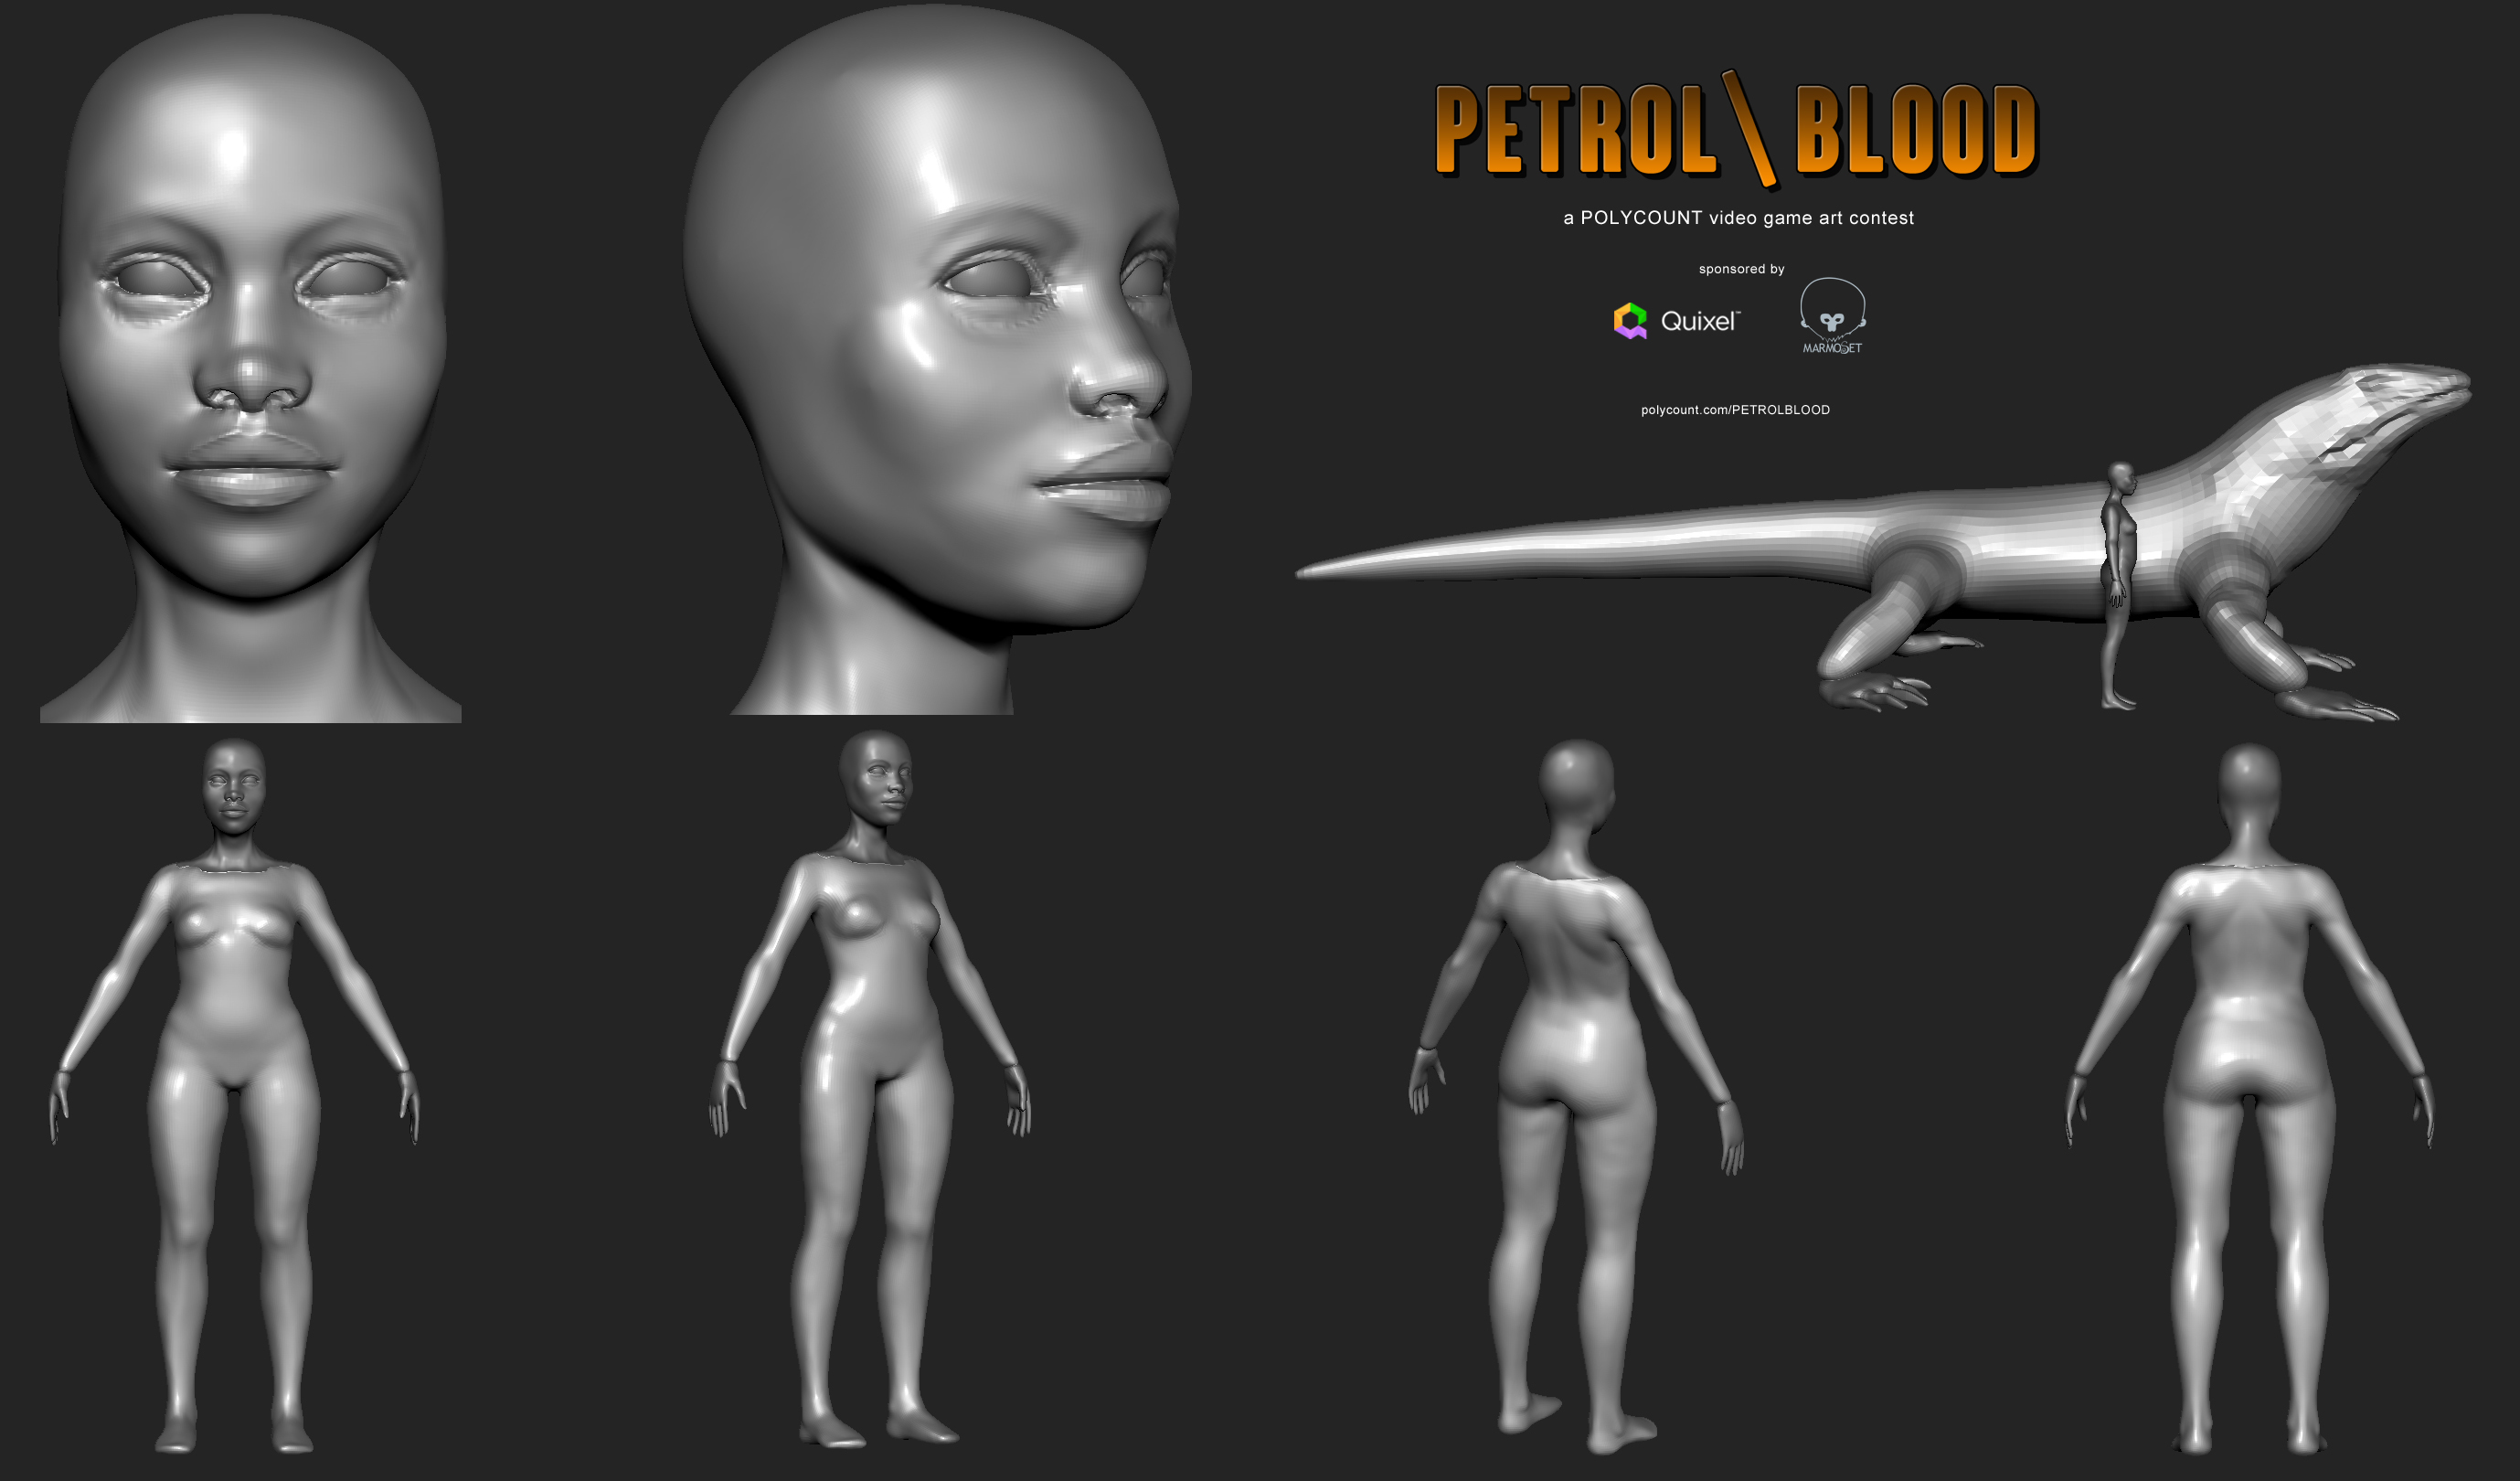 petroblood_wip01_by_theartistictiger-d7p9mbj.jpg